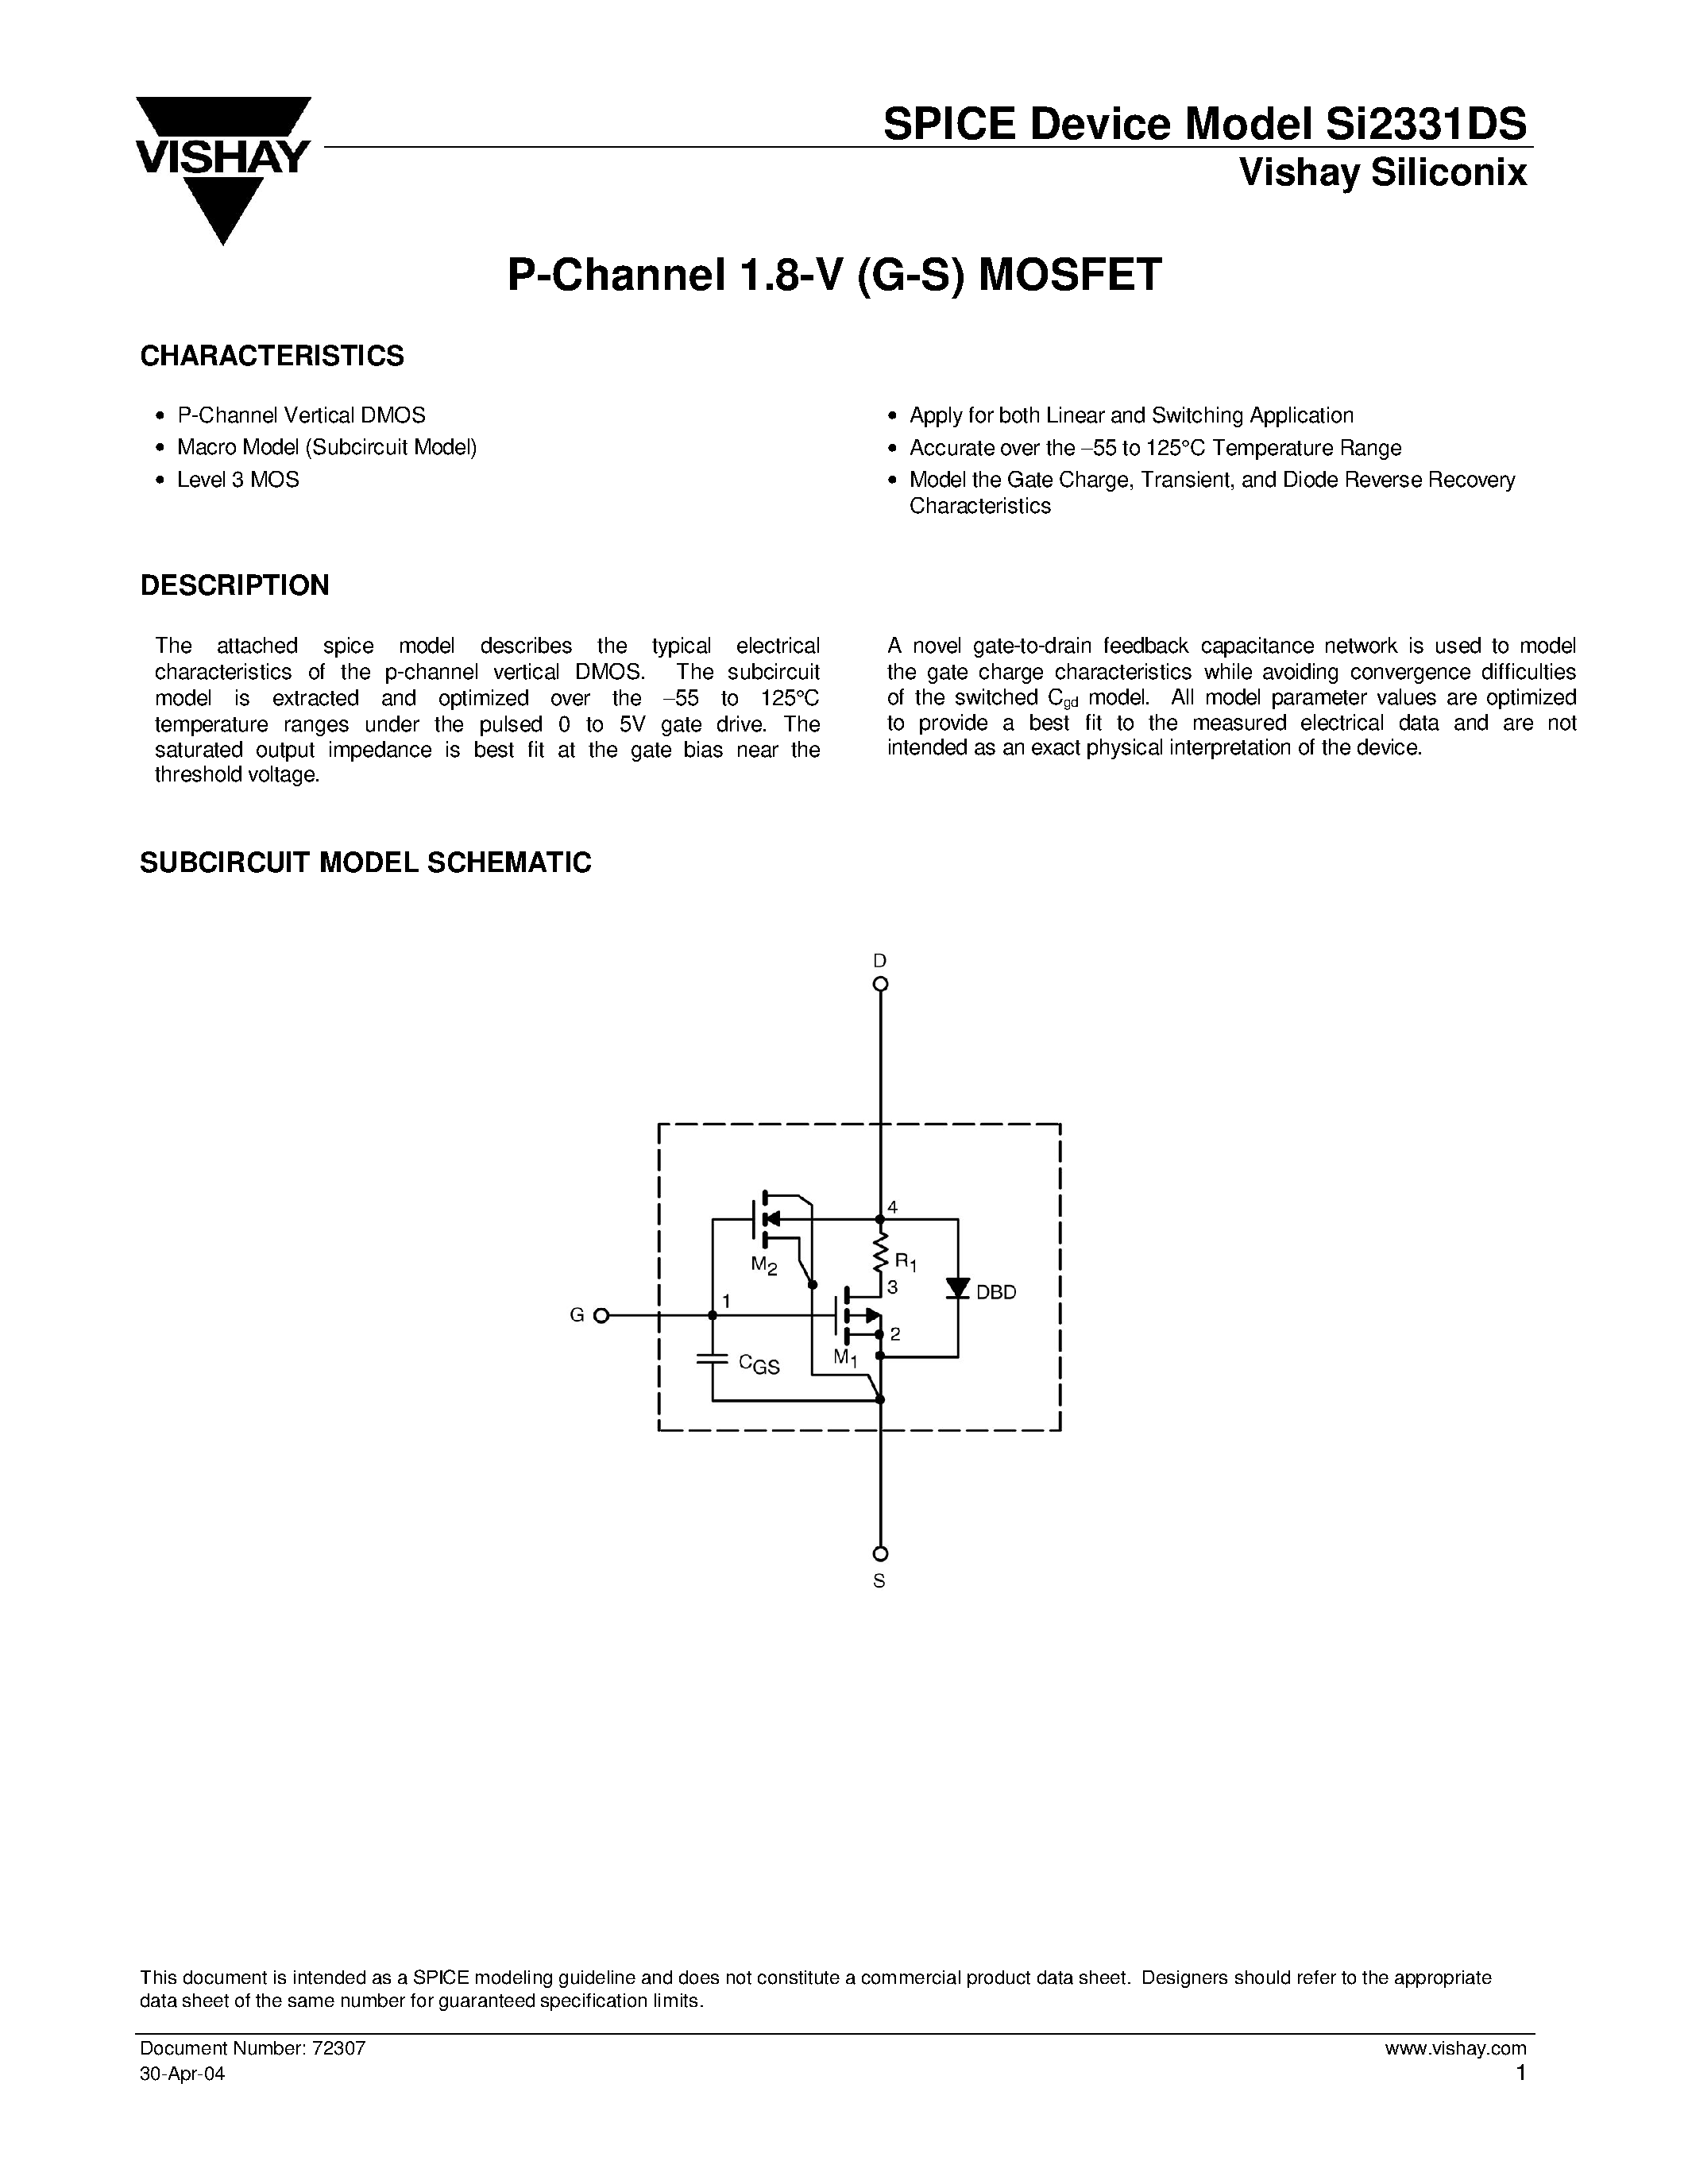 Datasheet SI2331DS - P-Channel 1.8-V (G-S) MOSFET page 1